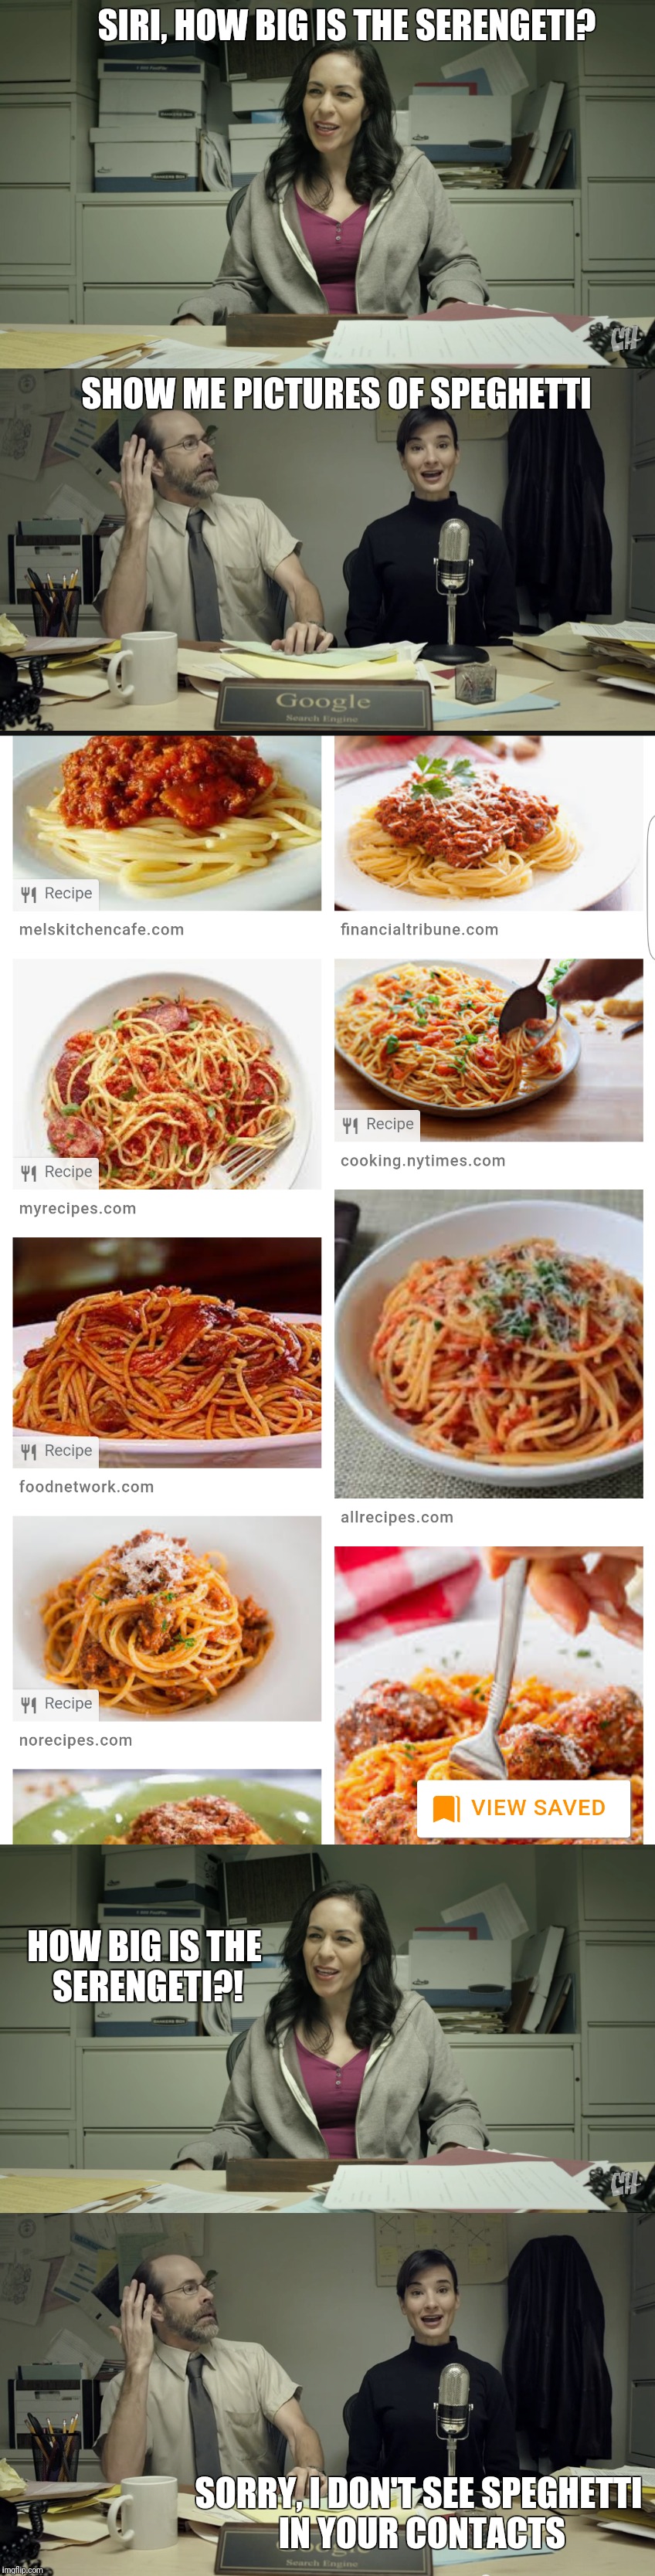 If Google was a Guy; Siri | SIRI, HOW BIG IS THE SERENGETI? SHOW ME PICTURES OF SPEGHETTI; HOW BIG IS THE SERENGETI?! SORRY, I DON'T SEE SPEGHETTI IN YOUR CONTACTS | image tagged in google,siri,food,funny,autocorrect,fail | made w/ Imgflip meme maker